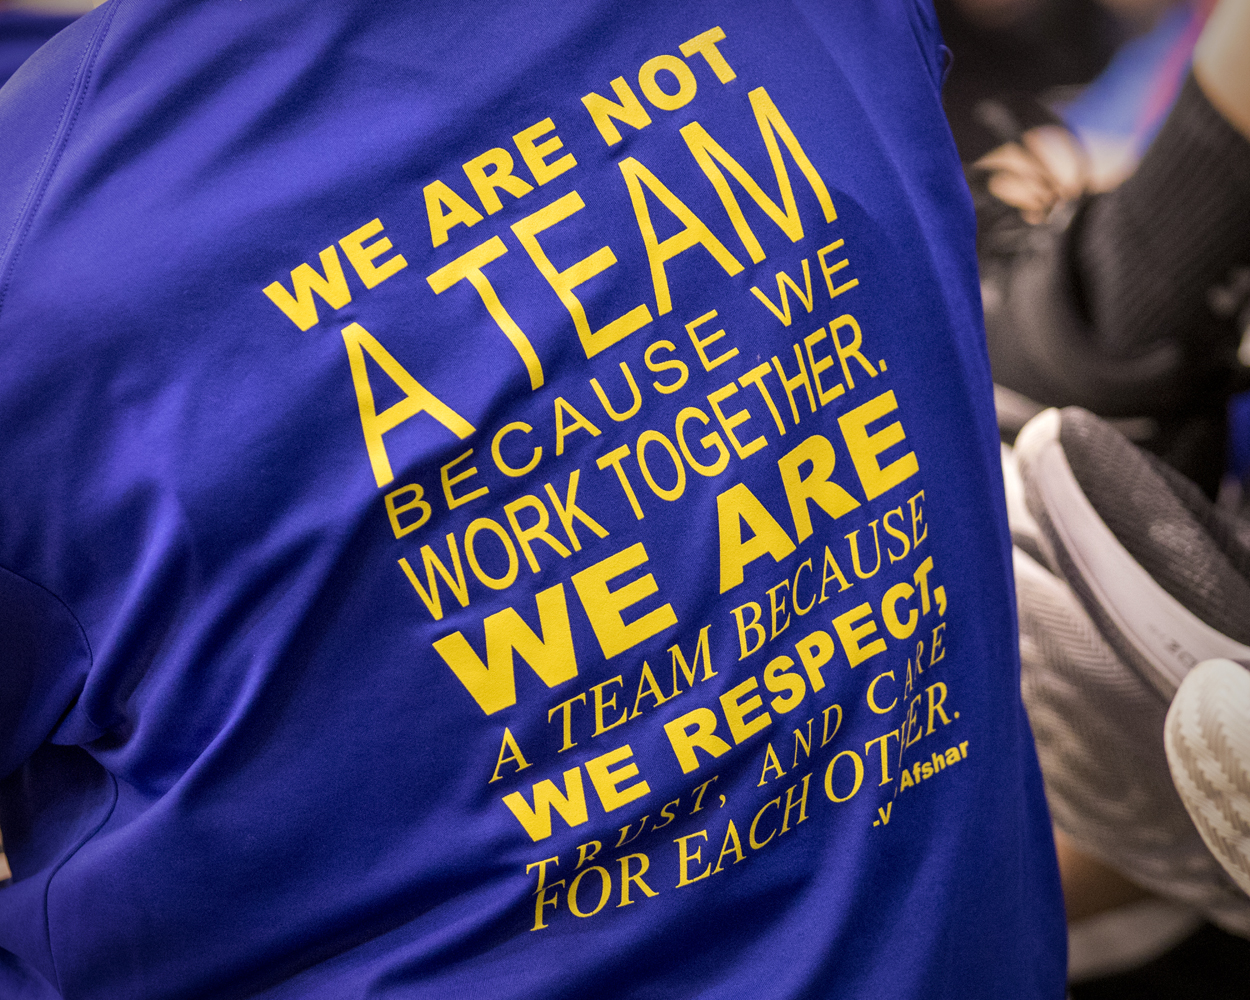 T-shirt with text: We are not a team because we work together. We are a team because we respect, trust, and are for each other.